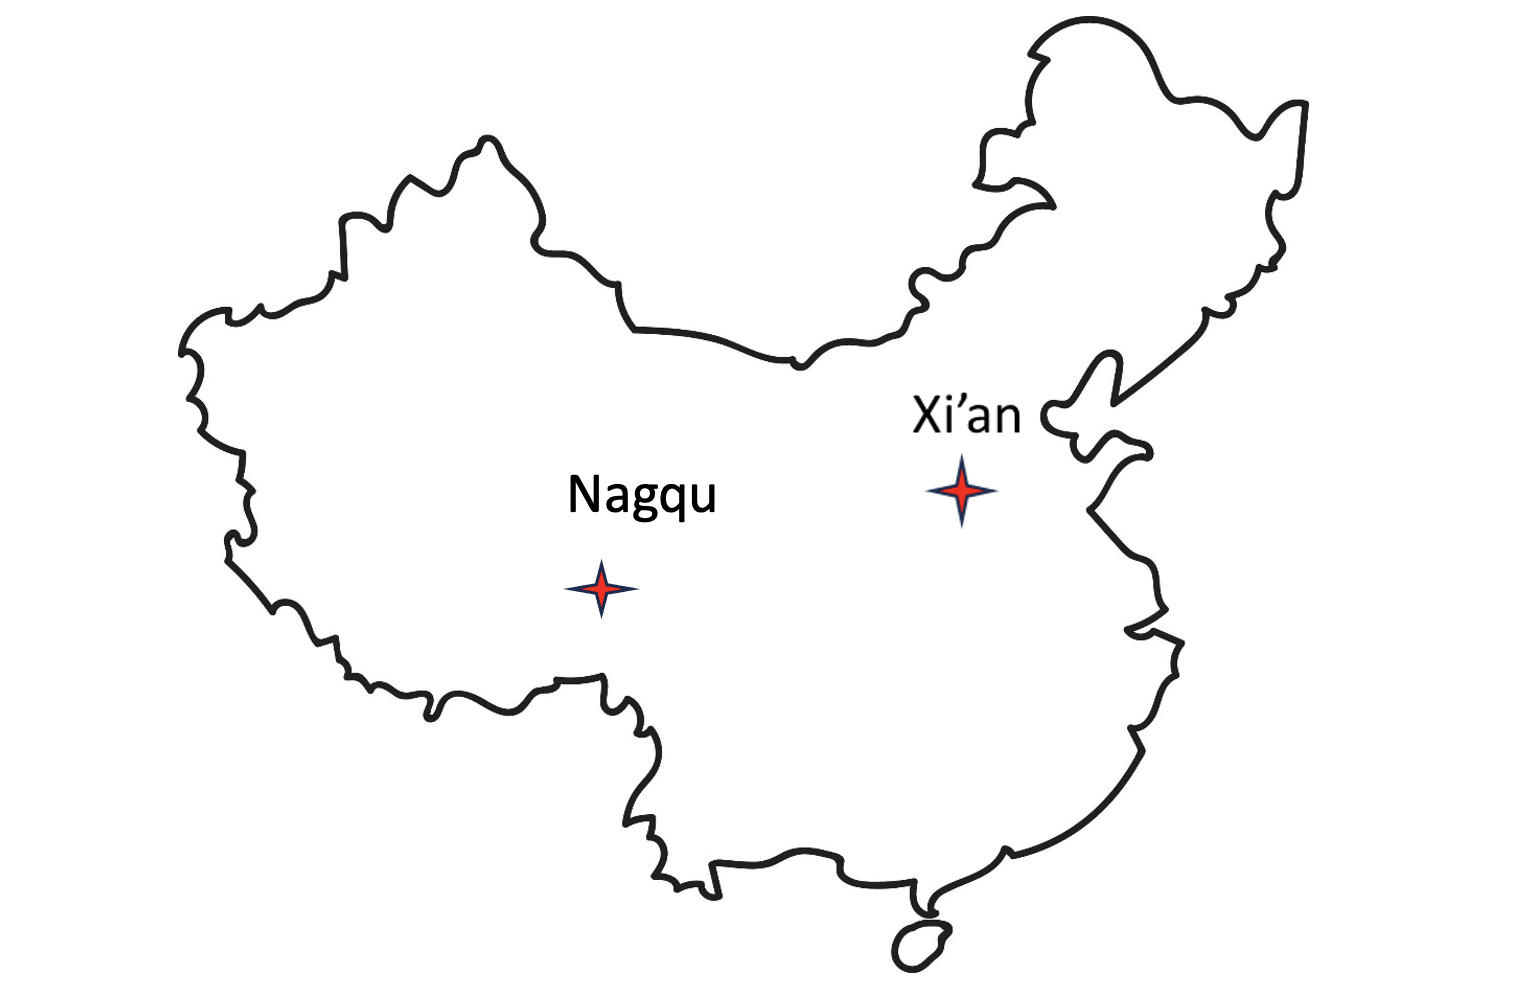 Construction recently announced in Xi'an and Nagqu as part of China's High-precision Ground-based Timing System. 